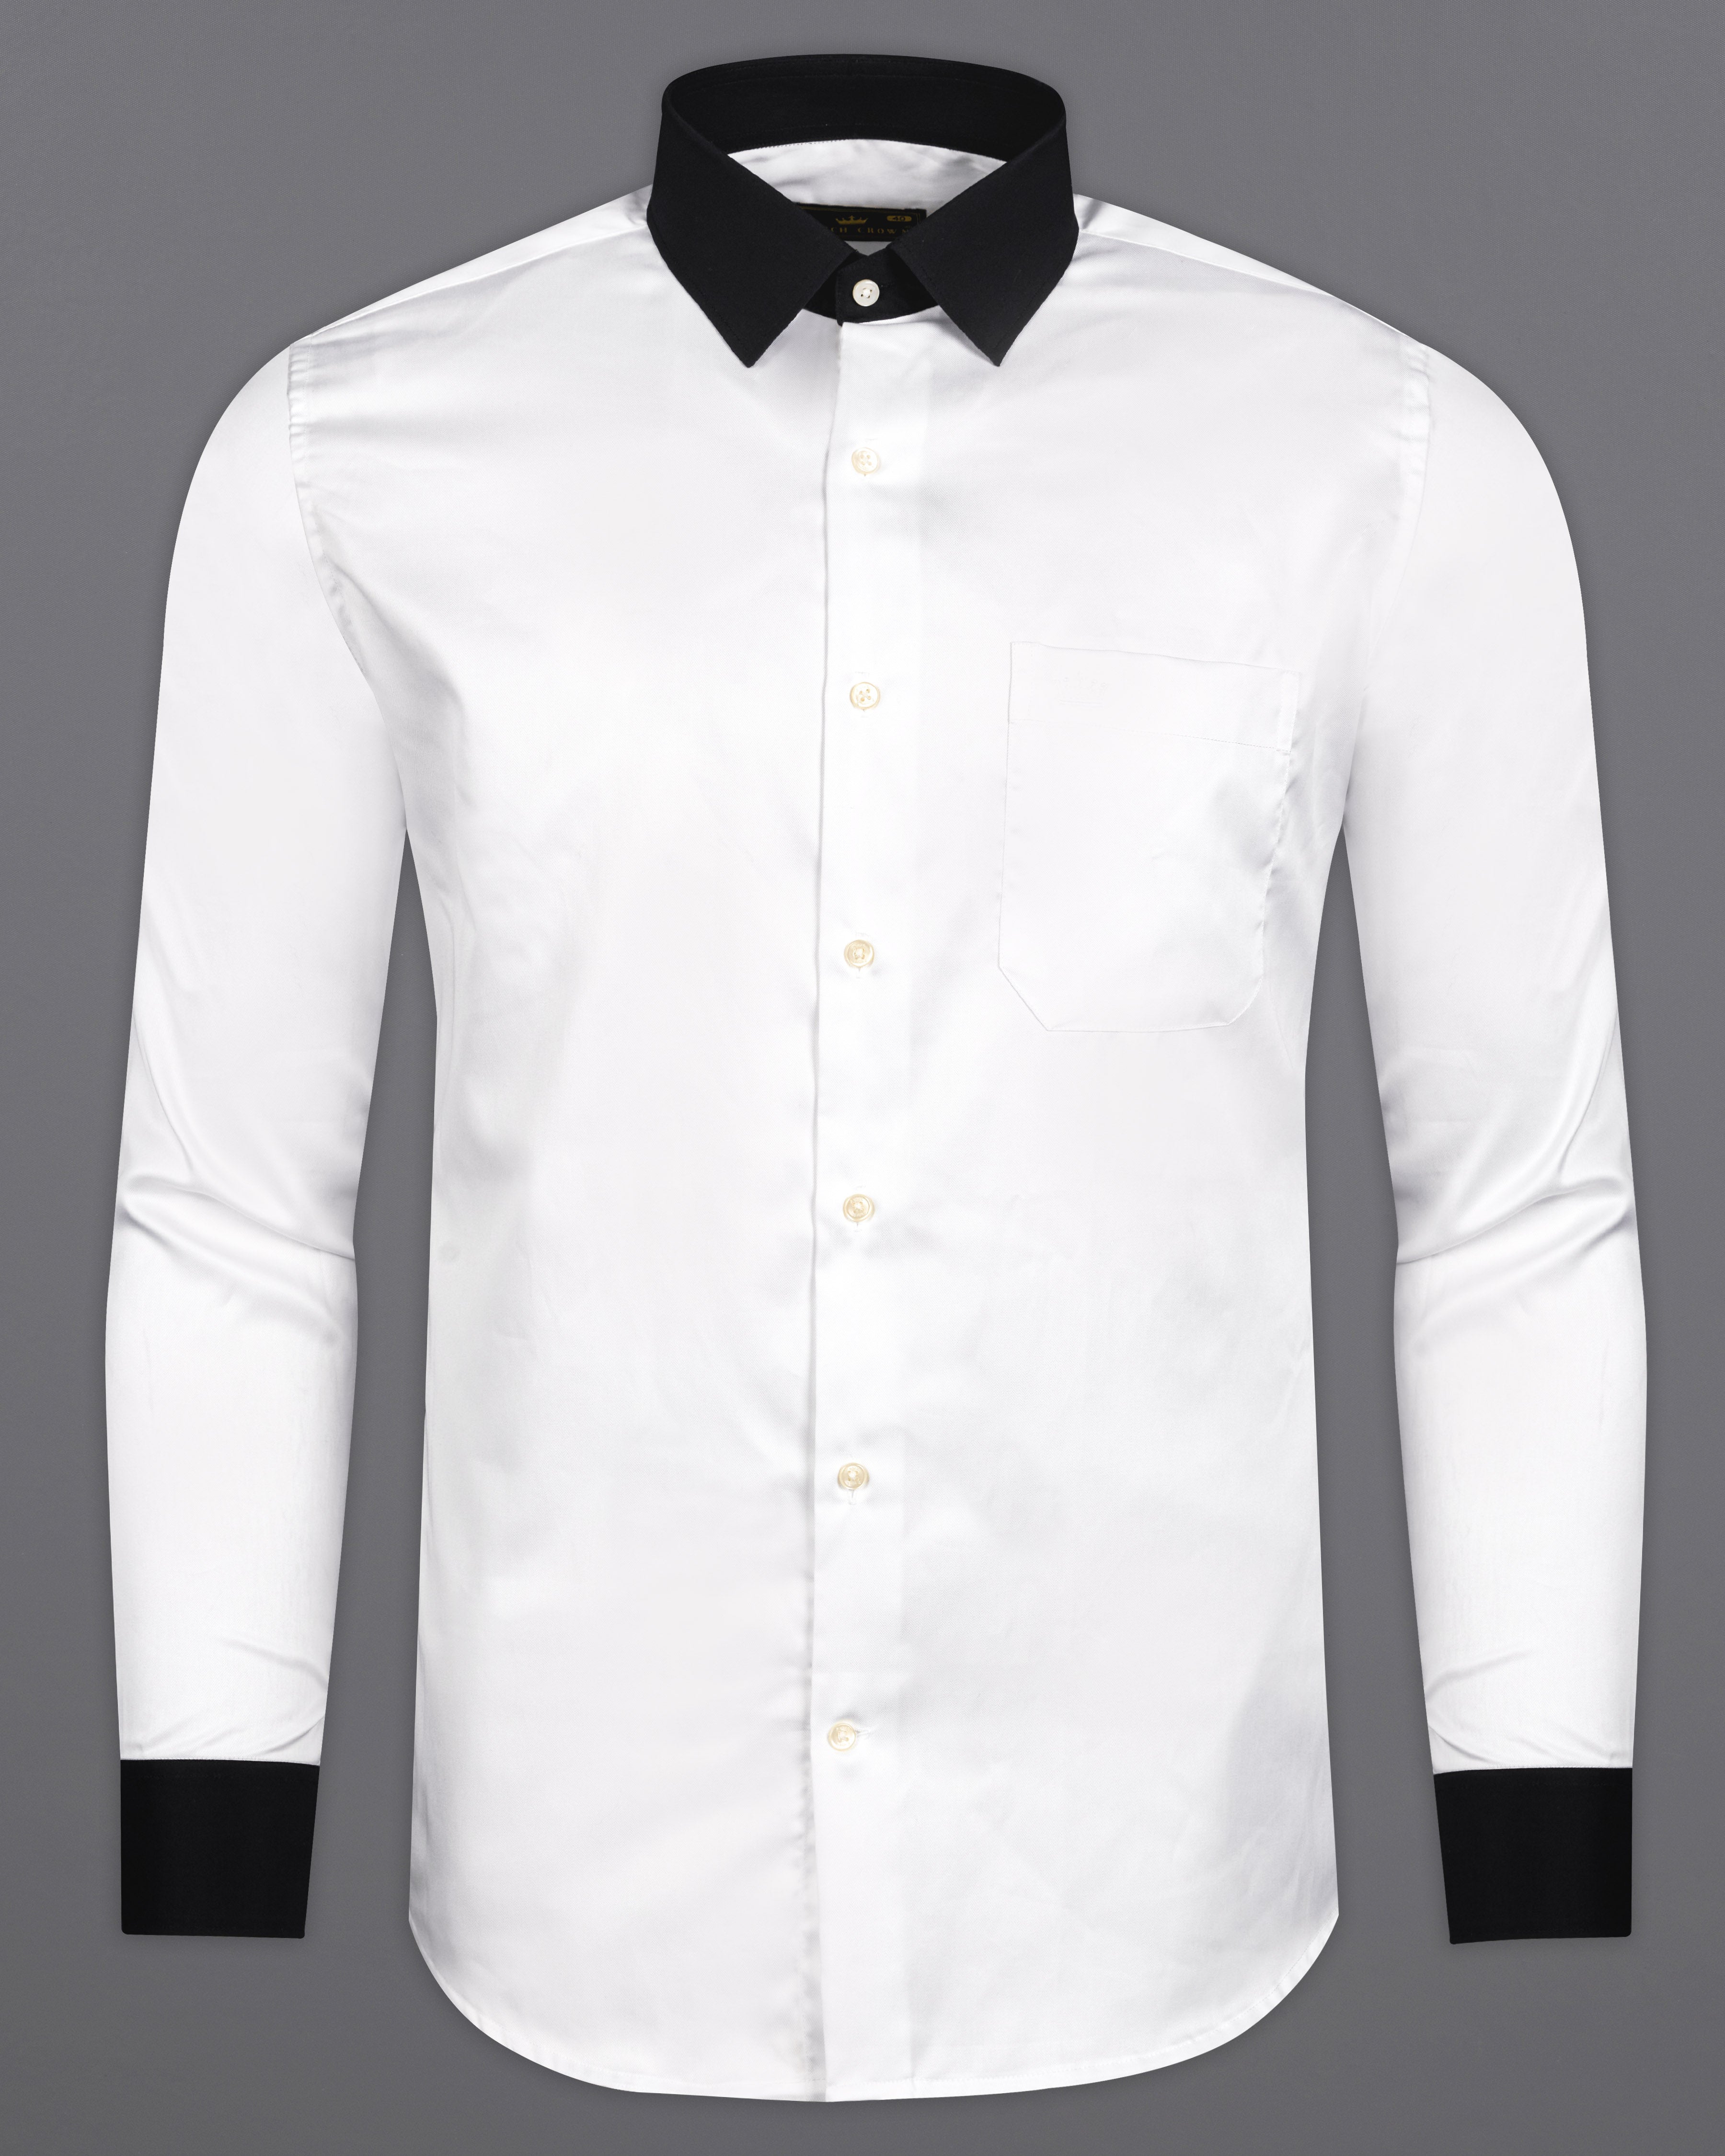 Bright White with Black Cuffs and Collar Twill Premium Cotton Shirt 9945-BCC-38, 9945-BCC-H-38, 9945-BCC-39, 9945-BCC-H-39, 9945-BCC-40, 9945-BCC-H-40, 9945-BCC-42, 9945-BCC-H-42, 9945-BCC-44, 9945-BCC-H-44, 9945-BCC-46, 9945-BCC-H-46, 9945-BCC-48, 9945-BCC-H-48, 9945-BCC-50, 9945-BCC-H-50, 9945-BCC-52, 9945-BCC-H-52 